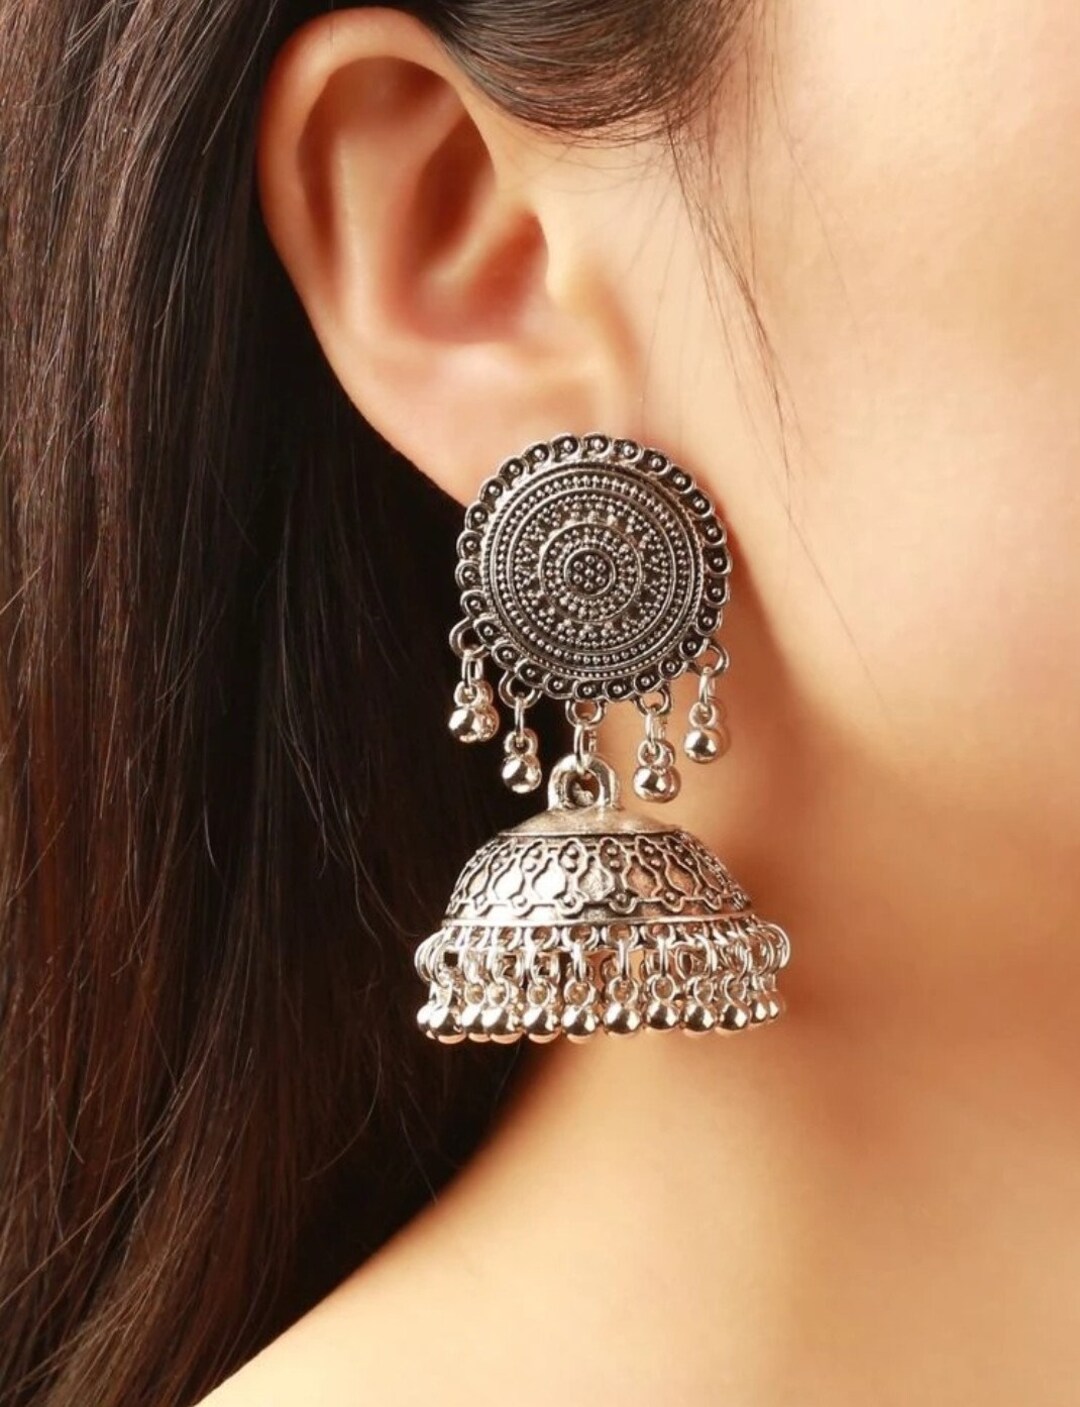 Buy Online COMBO OF 2 Limited Edition - Traditional Jhumka, Elegant,  Unique, Indian & Pakistani Jewelry, - Zifiti.com 1078802